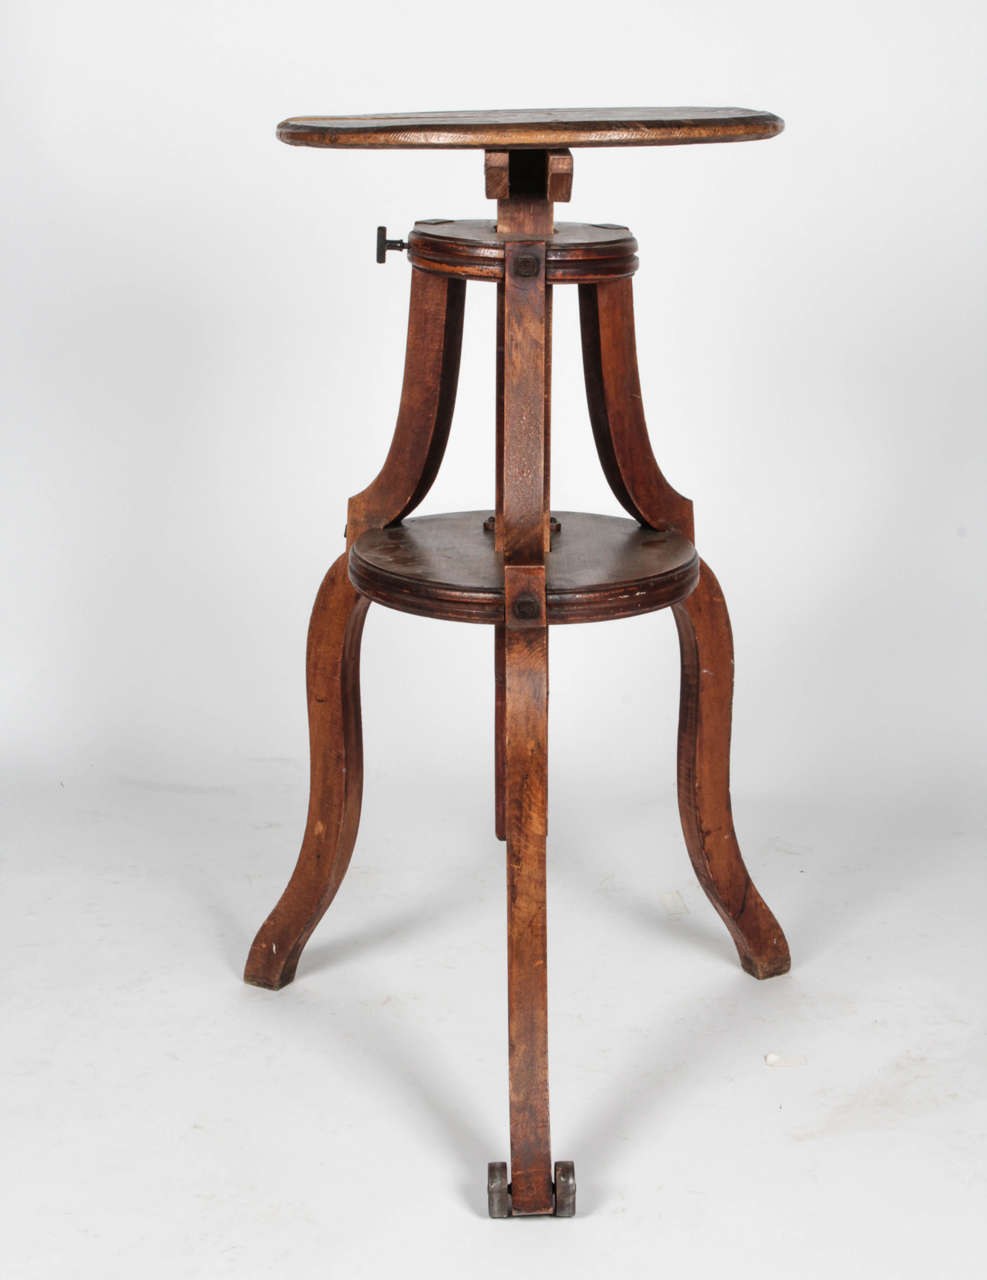 Wood pedestal that is adjustable in height. Has a single wheel for ease of moving piece.

*Not available for sale or to ship in the state of California.